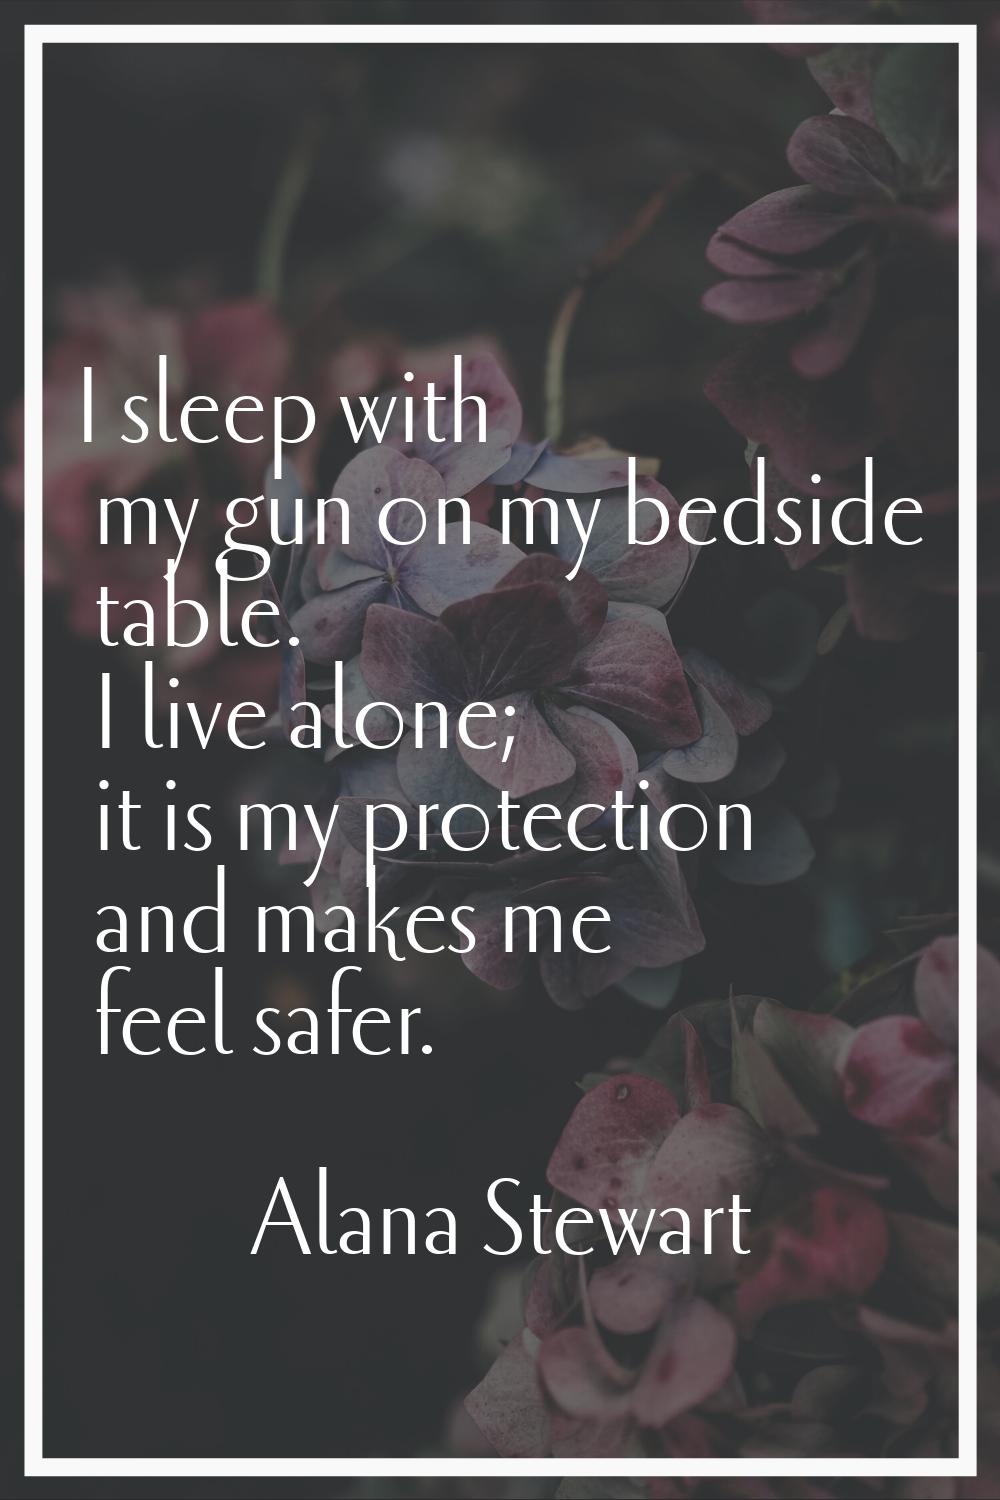 I sleep with my gun on my bedside table. I live alone; it is my protection and makes me feel safer.